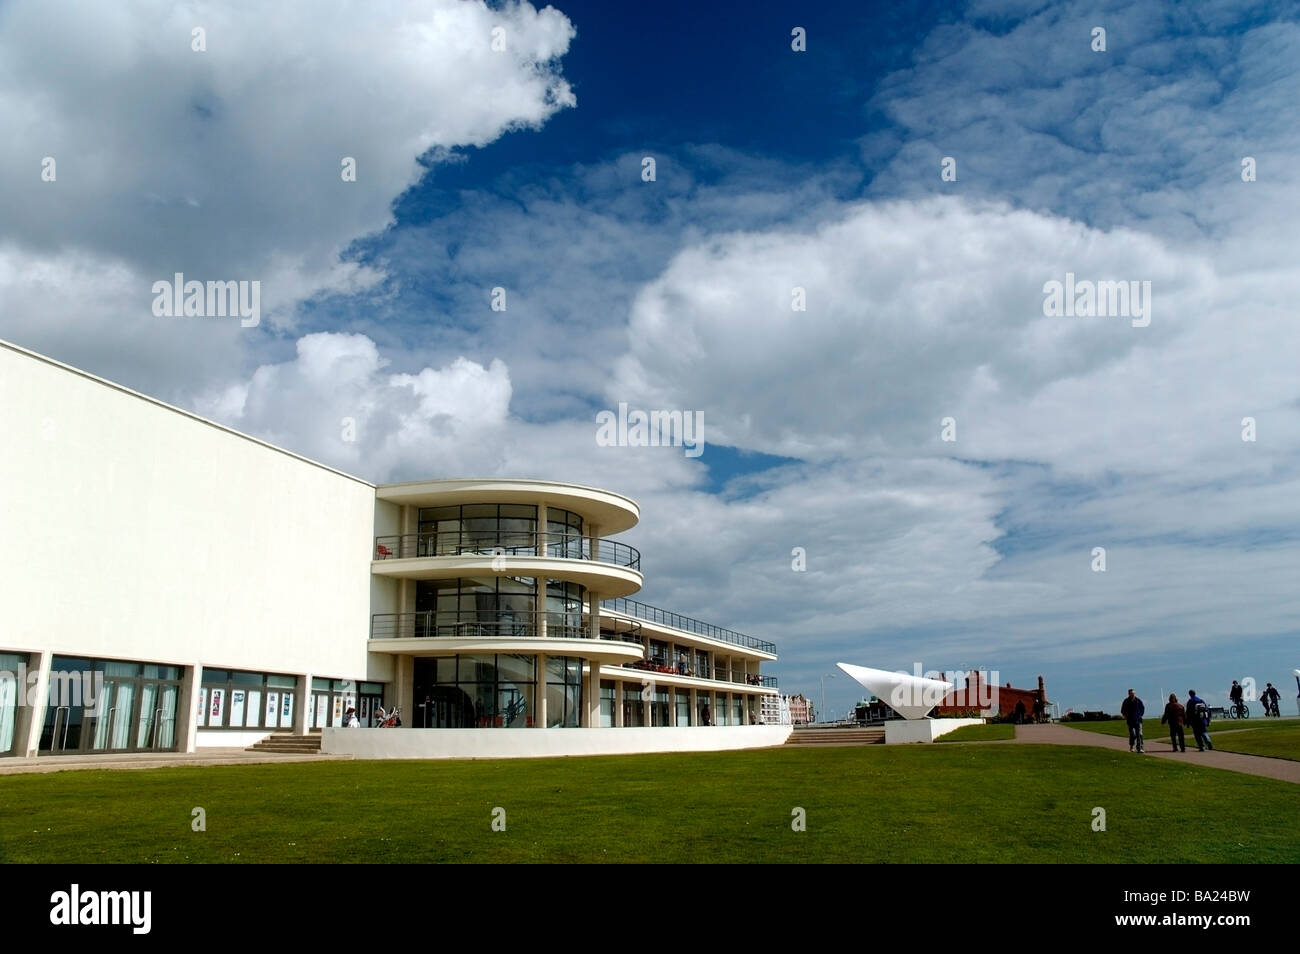 The renovated 1930s Art Deco De La Warr Pavilion, on the seafront, Bexhill on Sea, England. Stock Photo